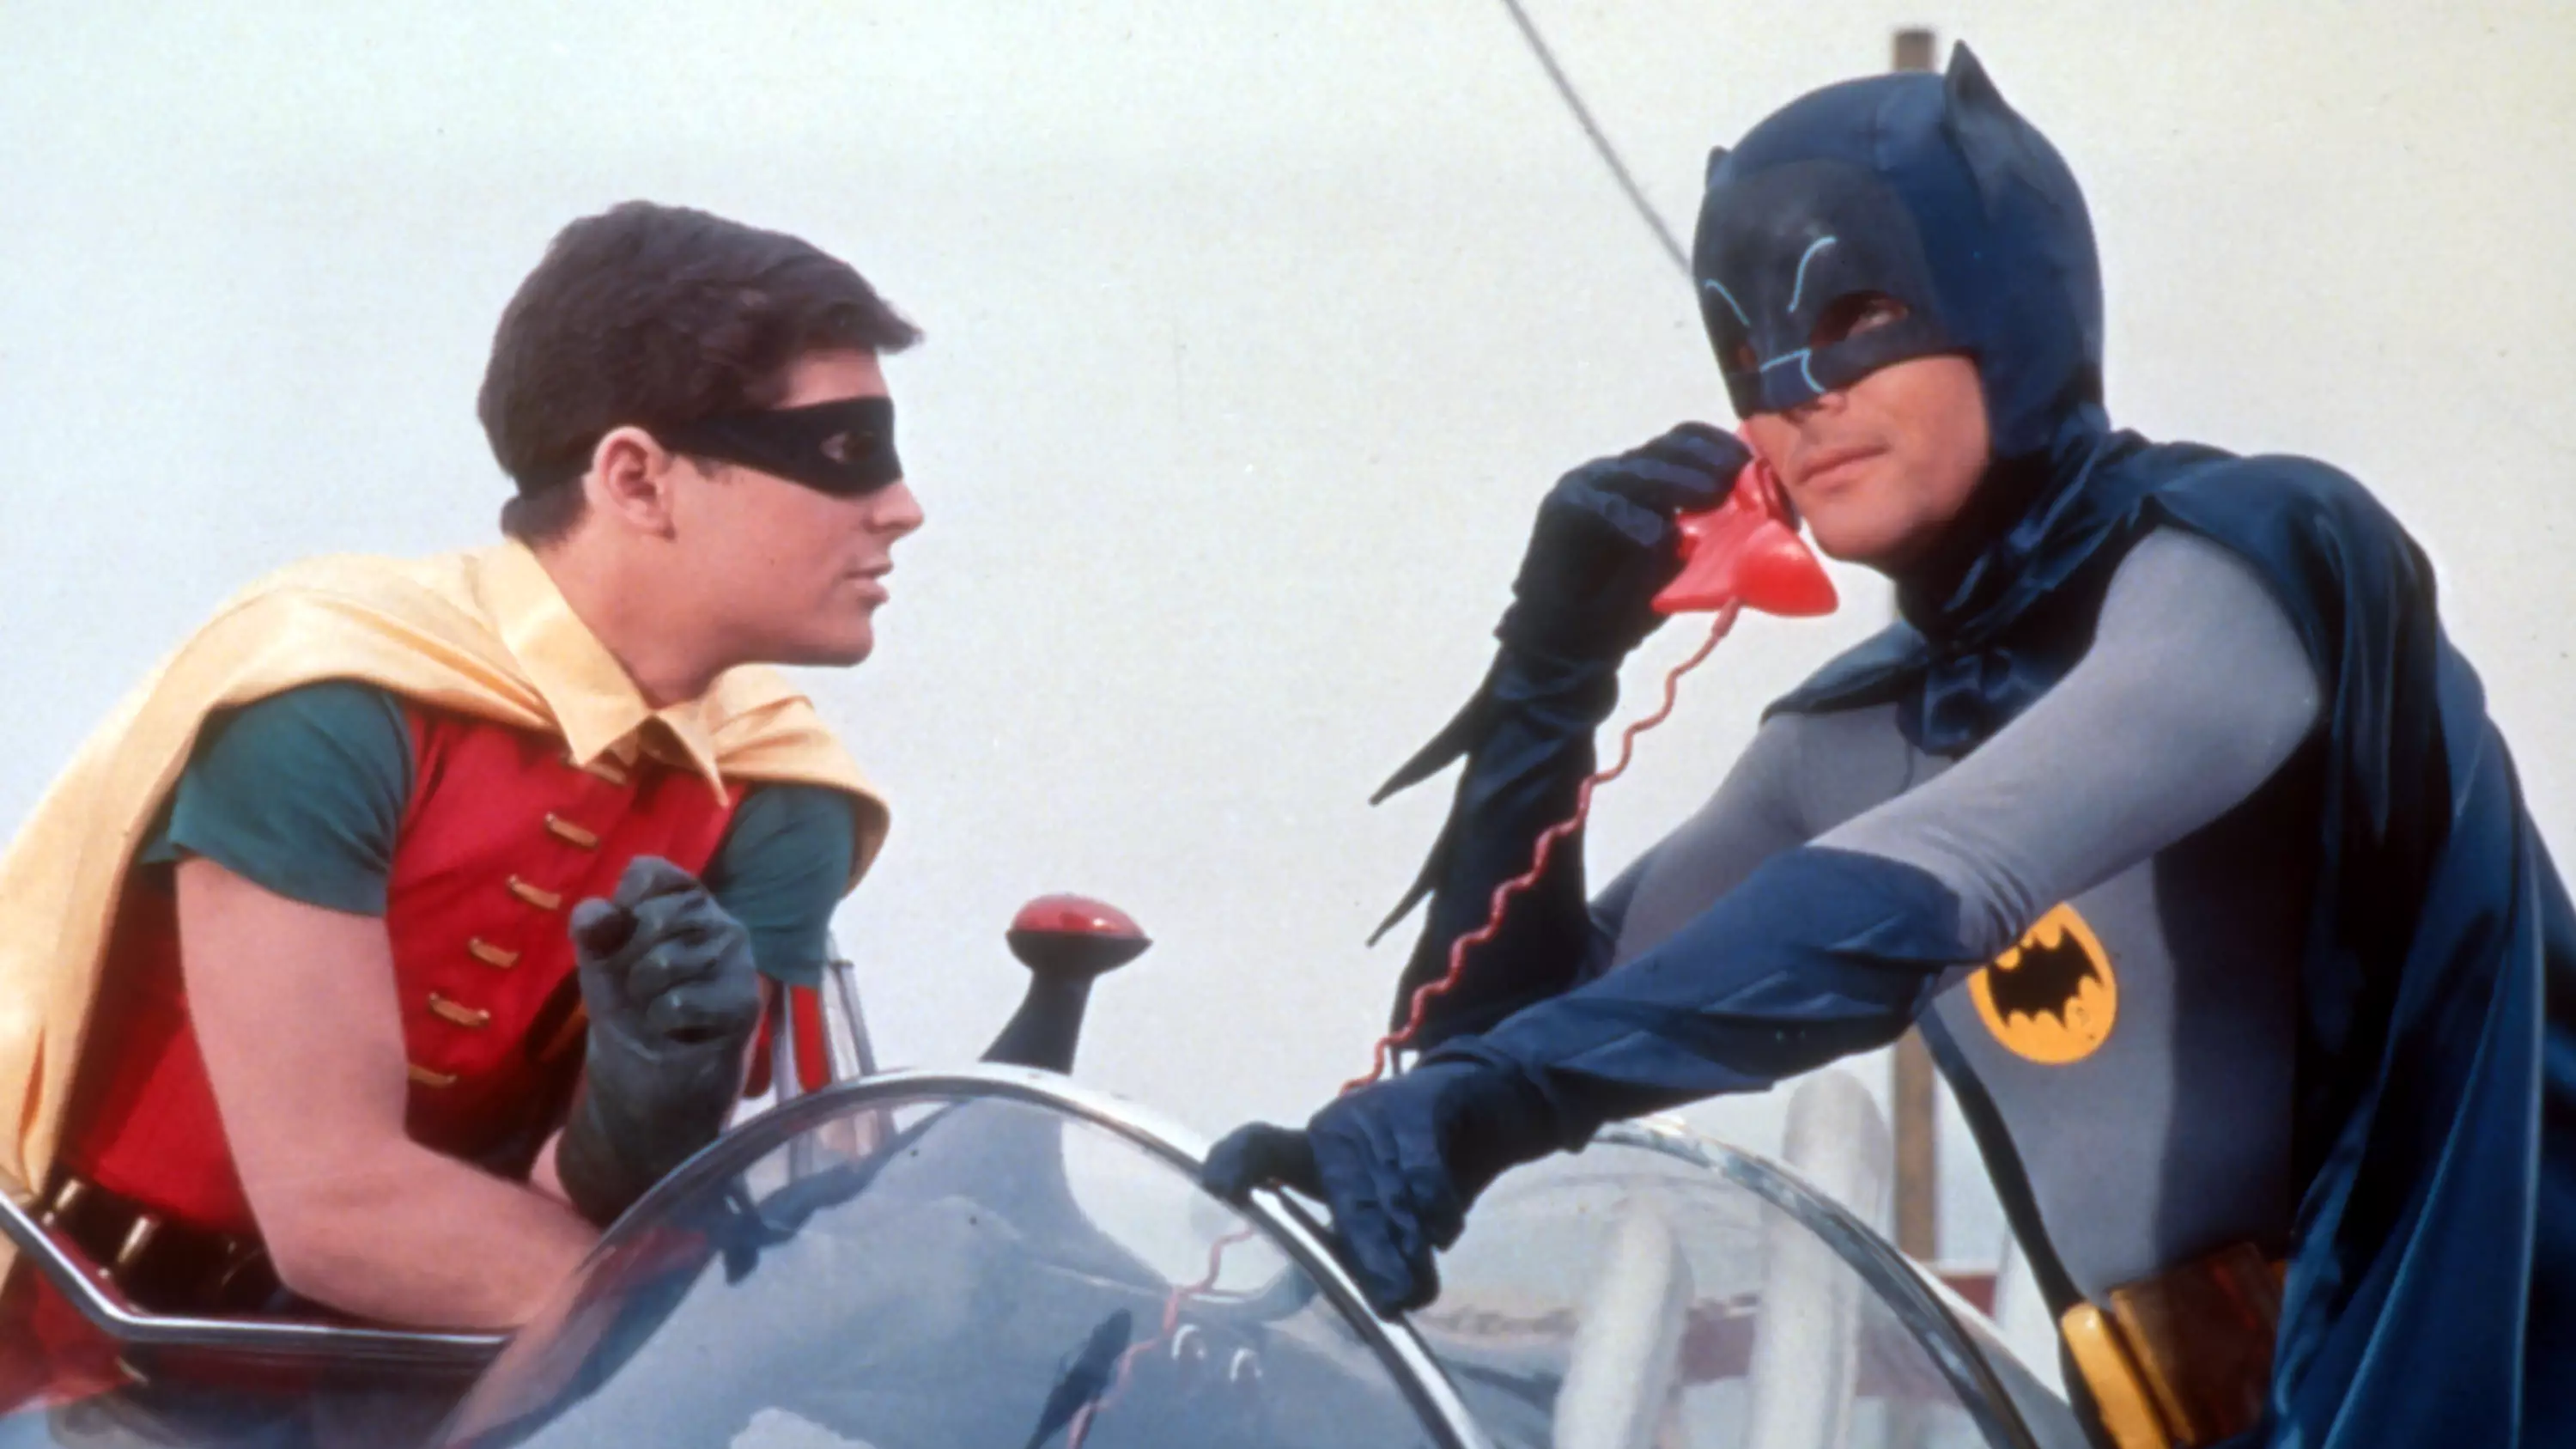 LA Is Going To Light Up The Bat-Signal In Tribute To Adam West